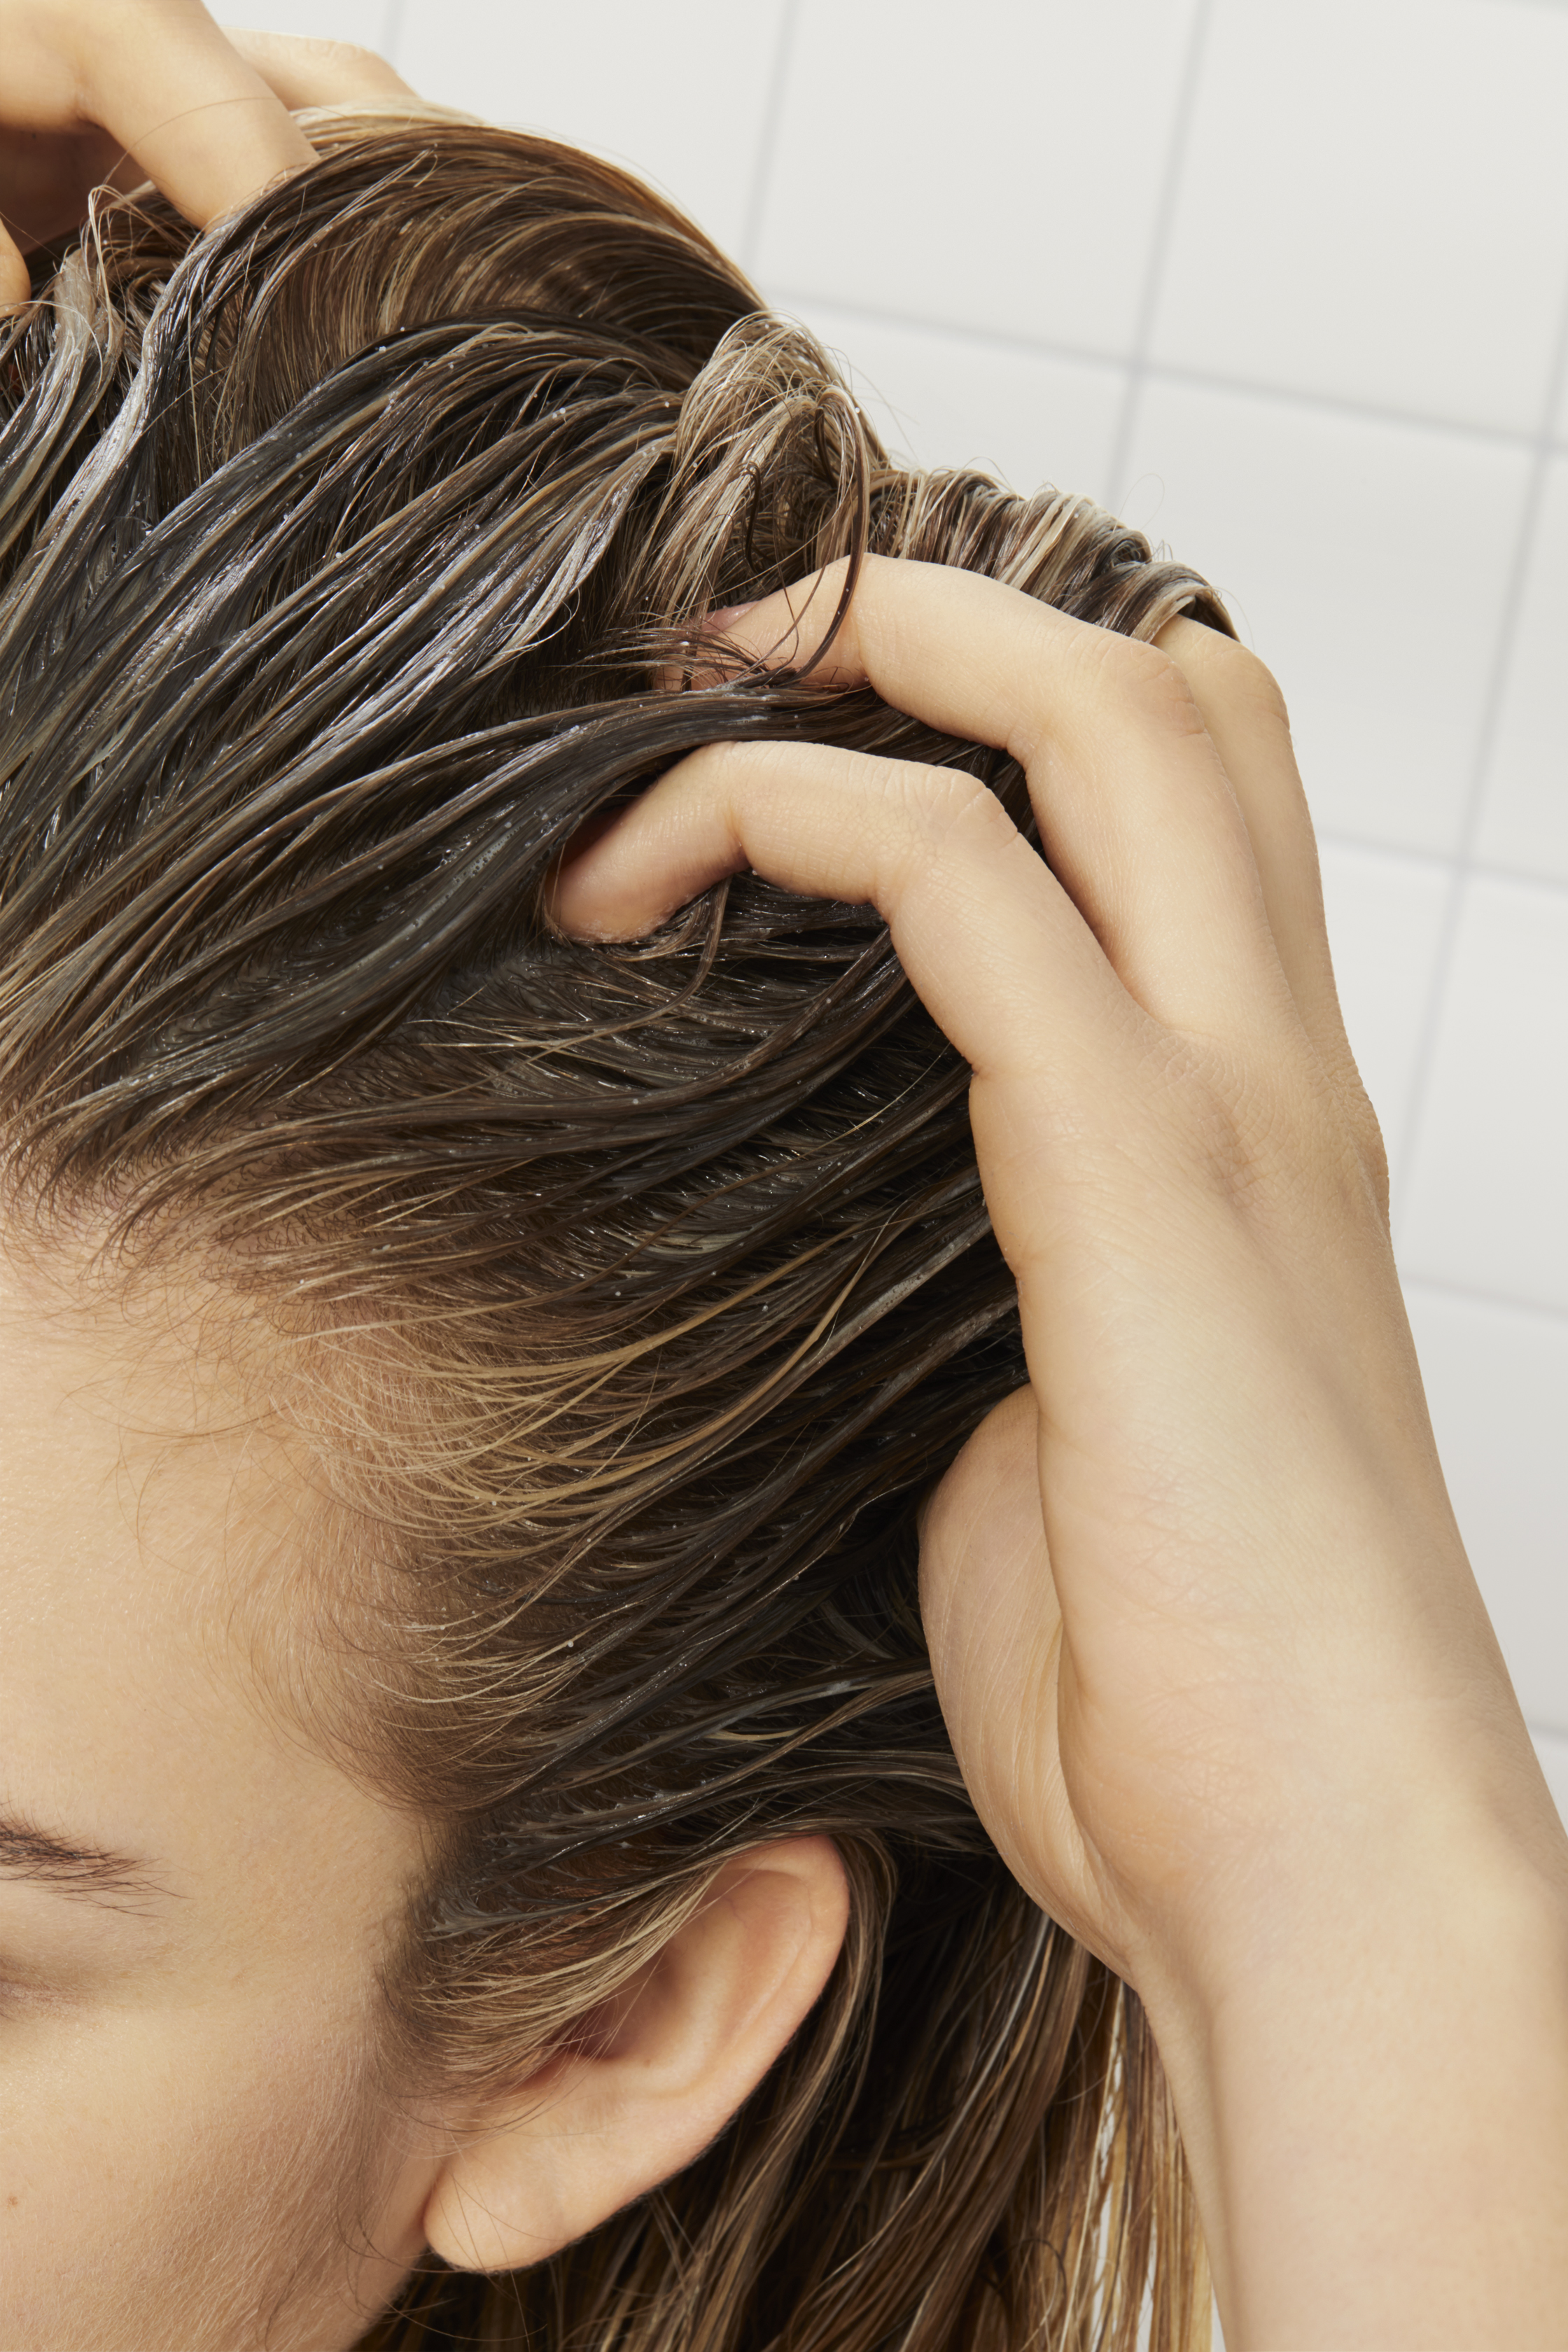 Why Does My Scalp Hurt |